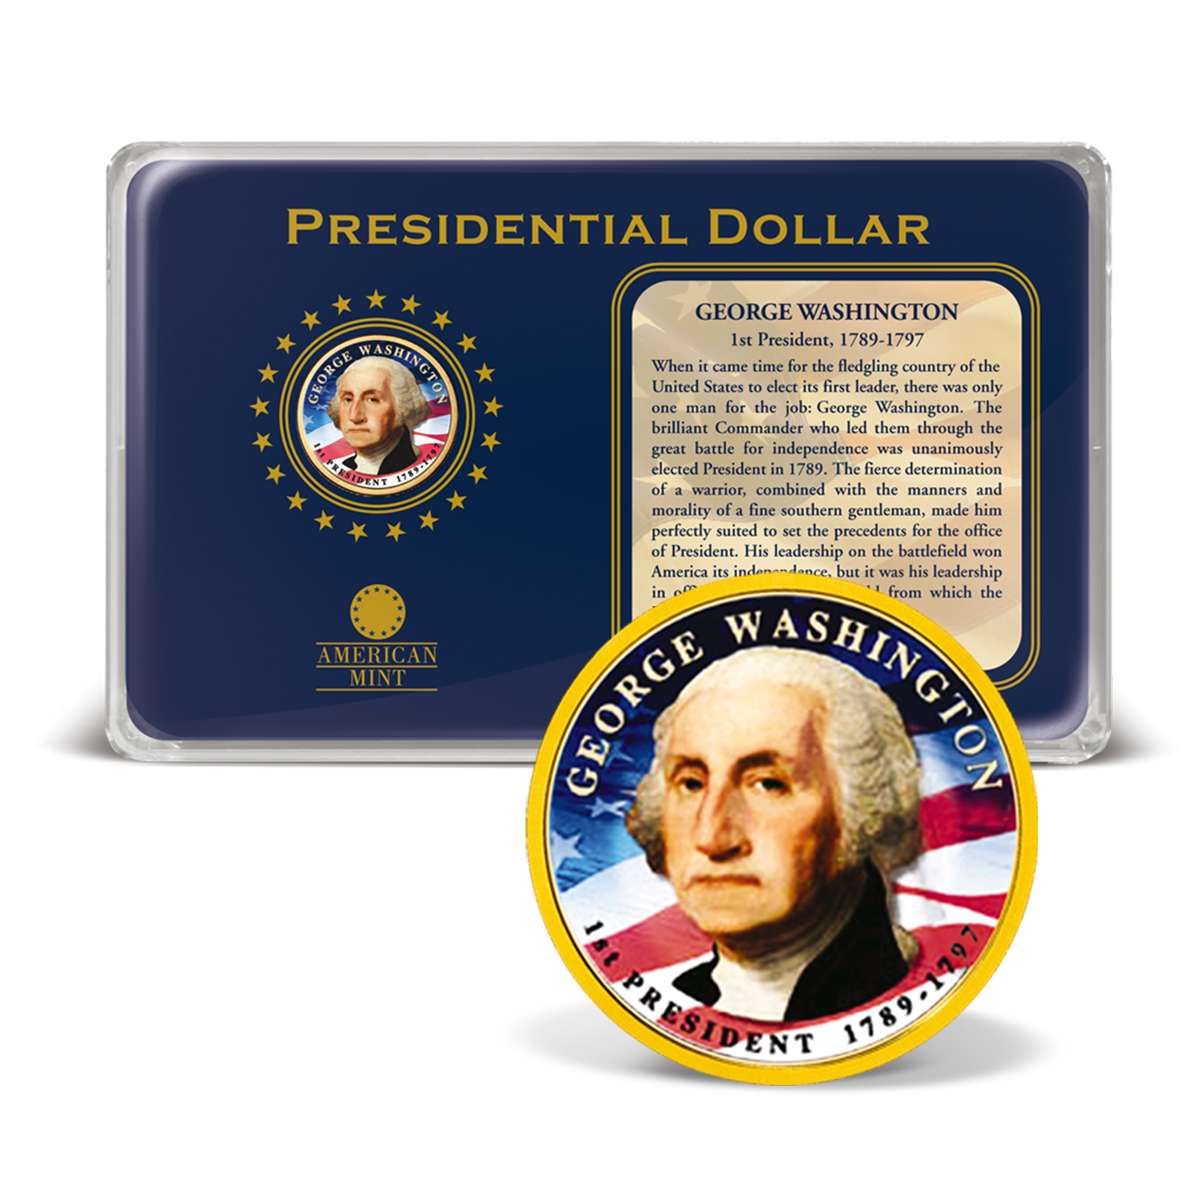 Details about   USA 2007 p  ONE DOLLAR GEORGE WASHINGTON PRESIDENTIAL COIN MONEY 2  #1 